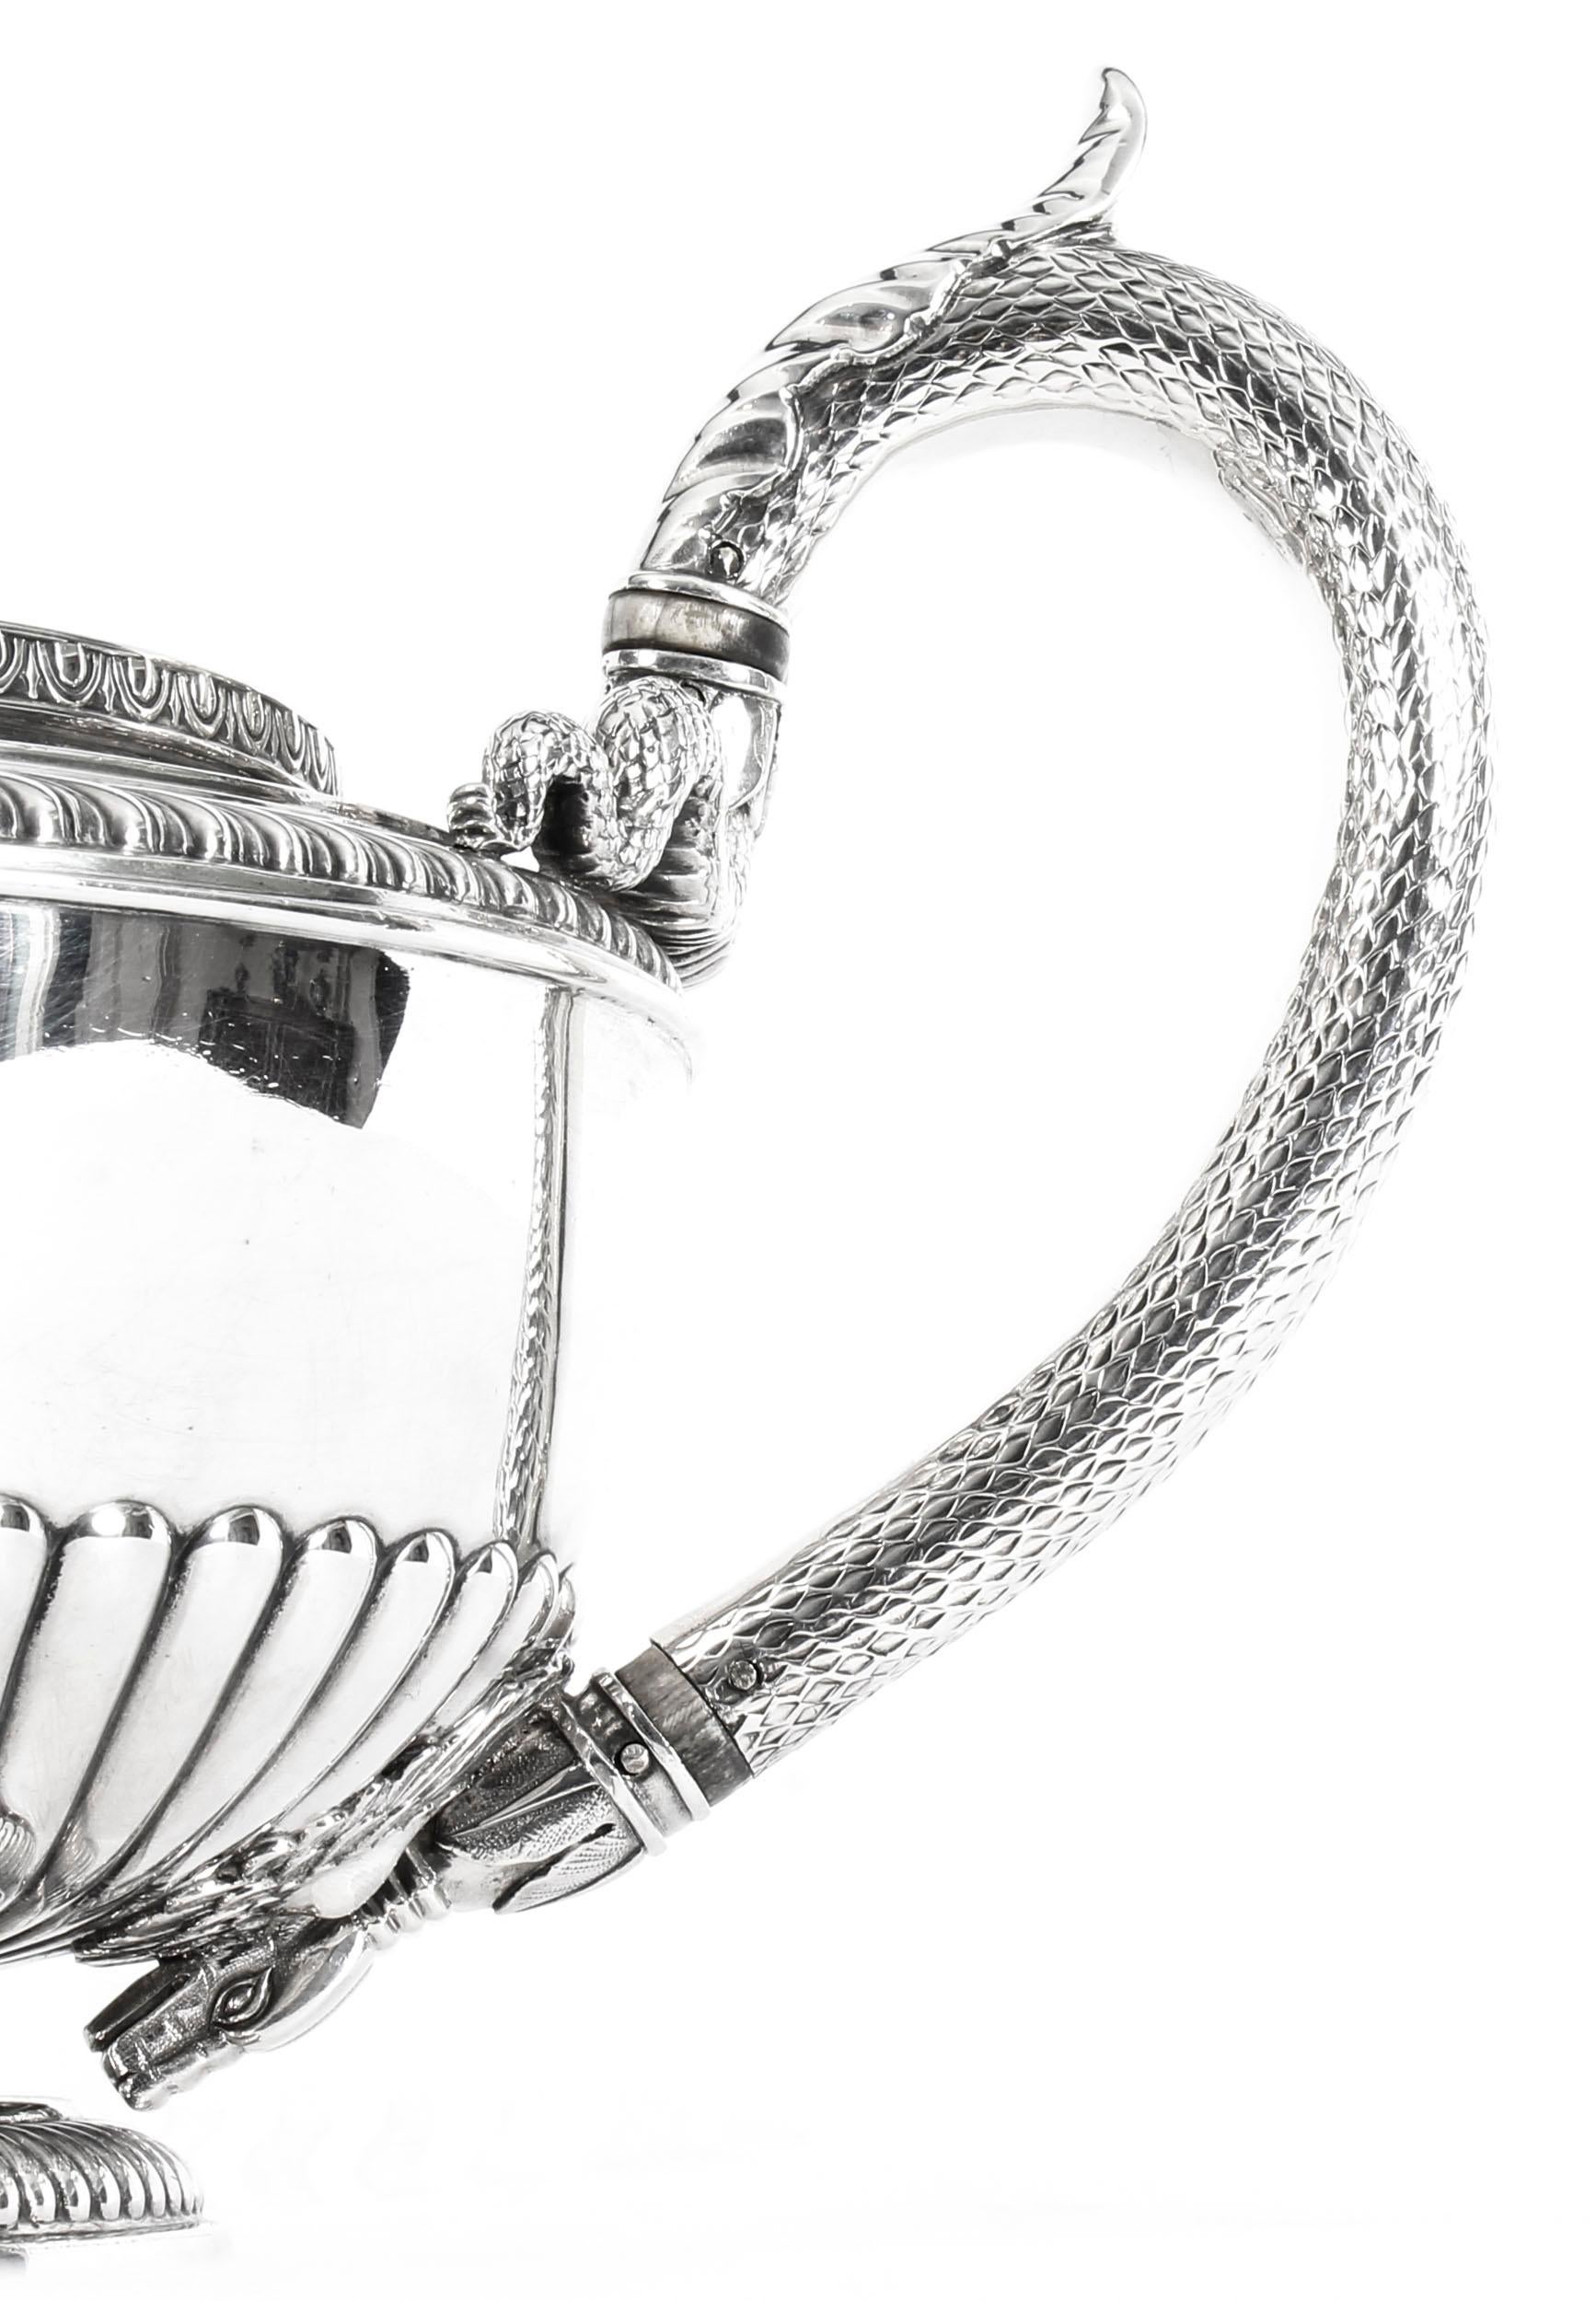 English Antique Georgian Sterling Silver Teapot by Paul Storr, 1810, 19th Century